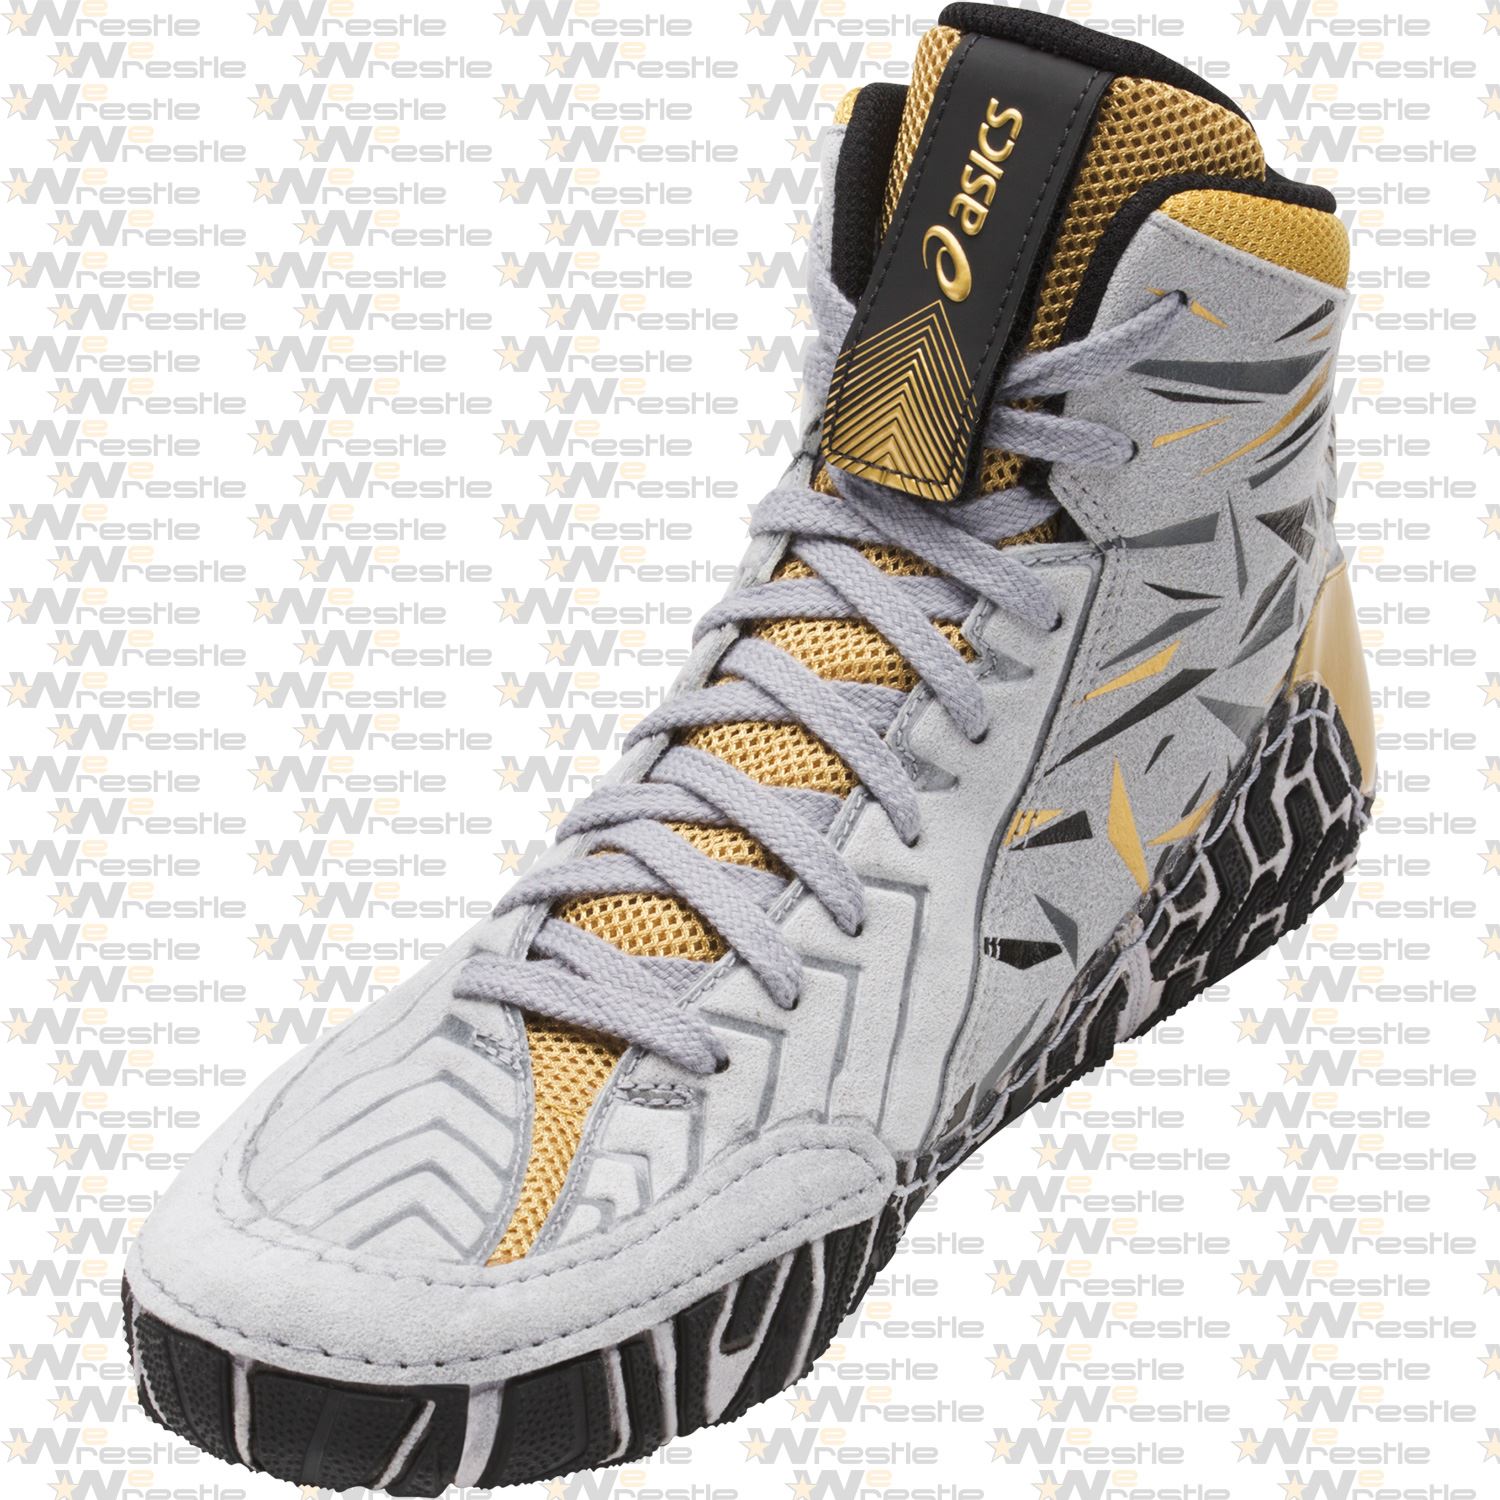 black and gold aggressors